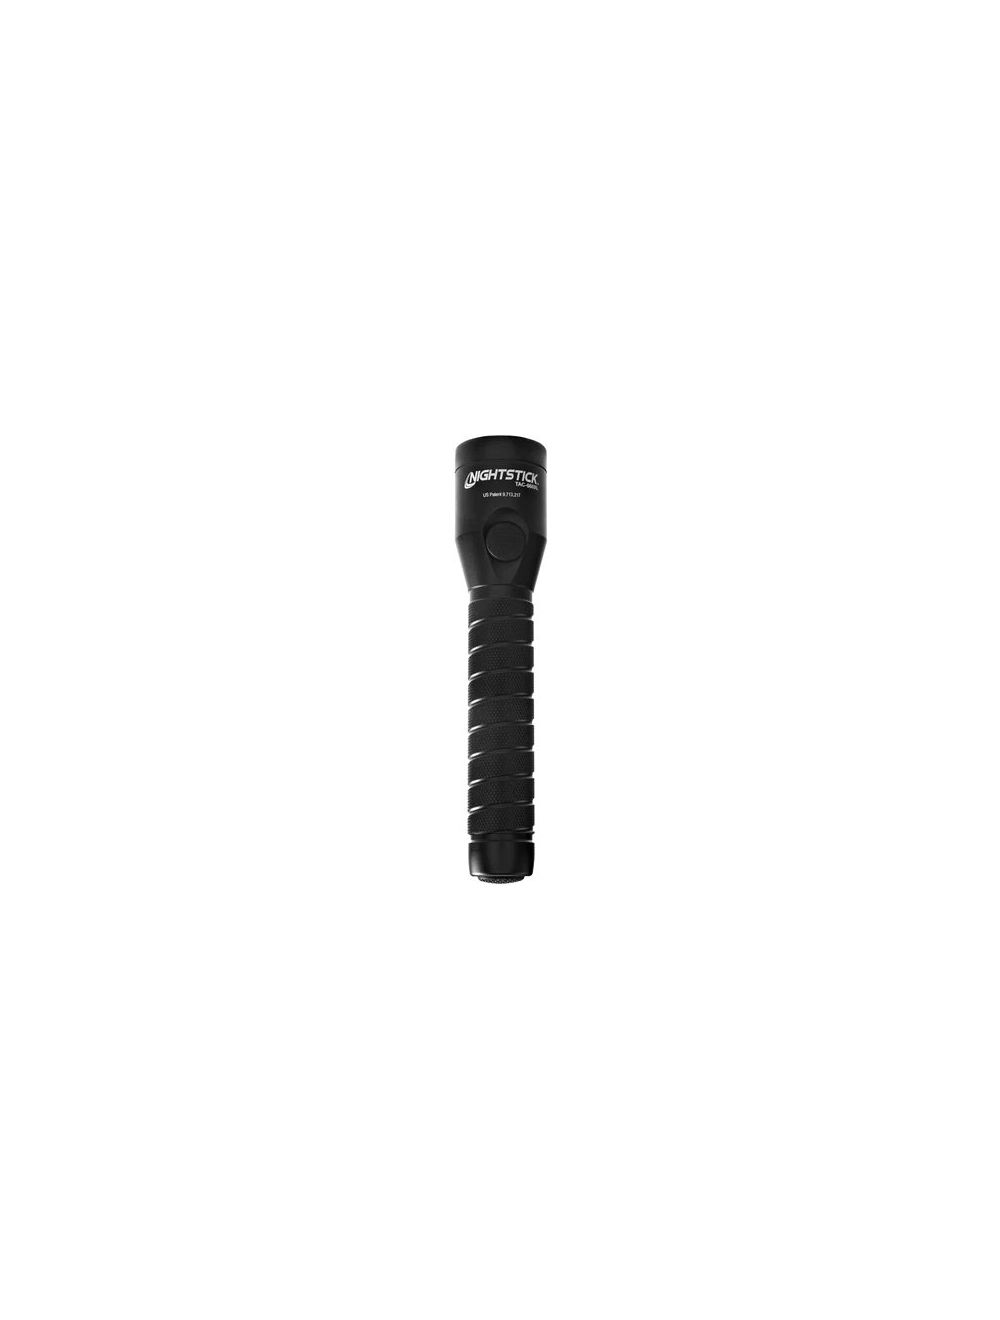 Dual-Switch Rechargeable Tactical Flashlight - Black